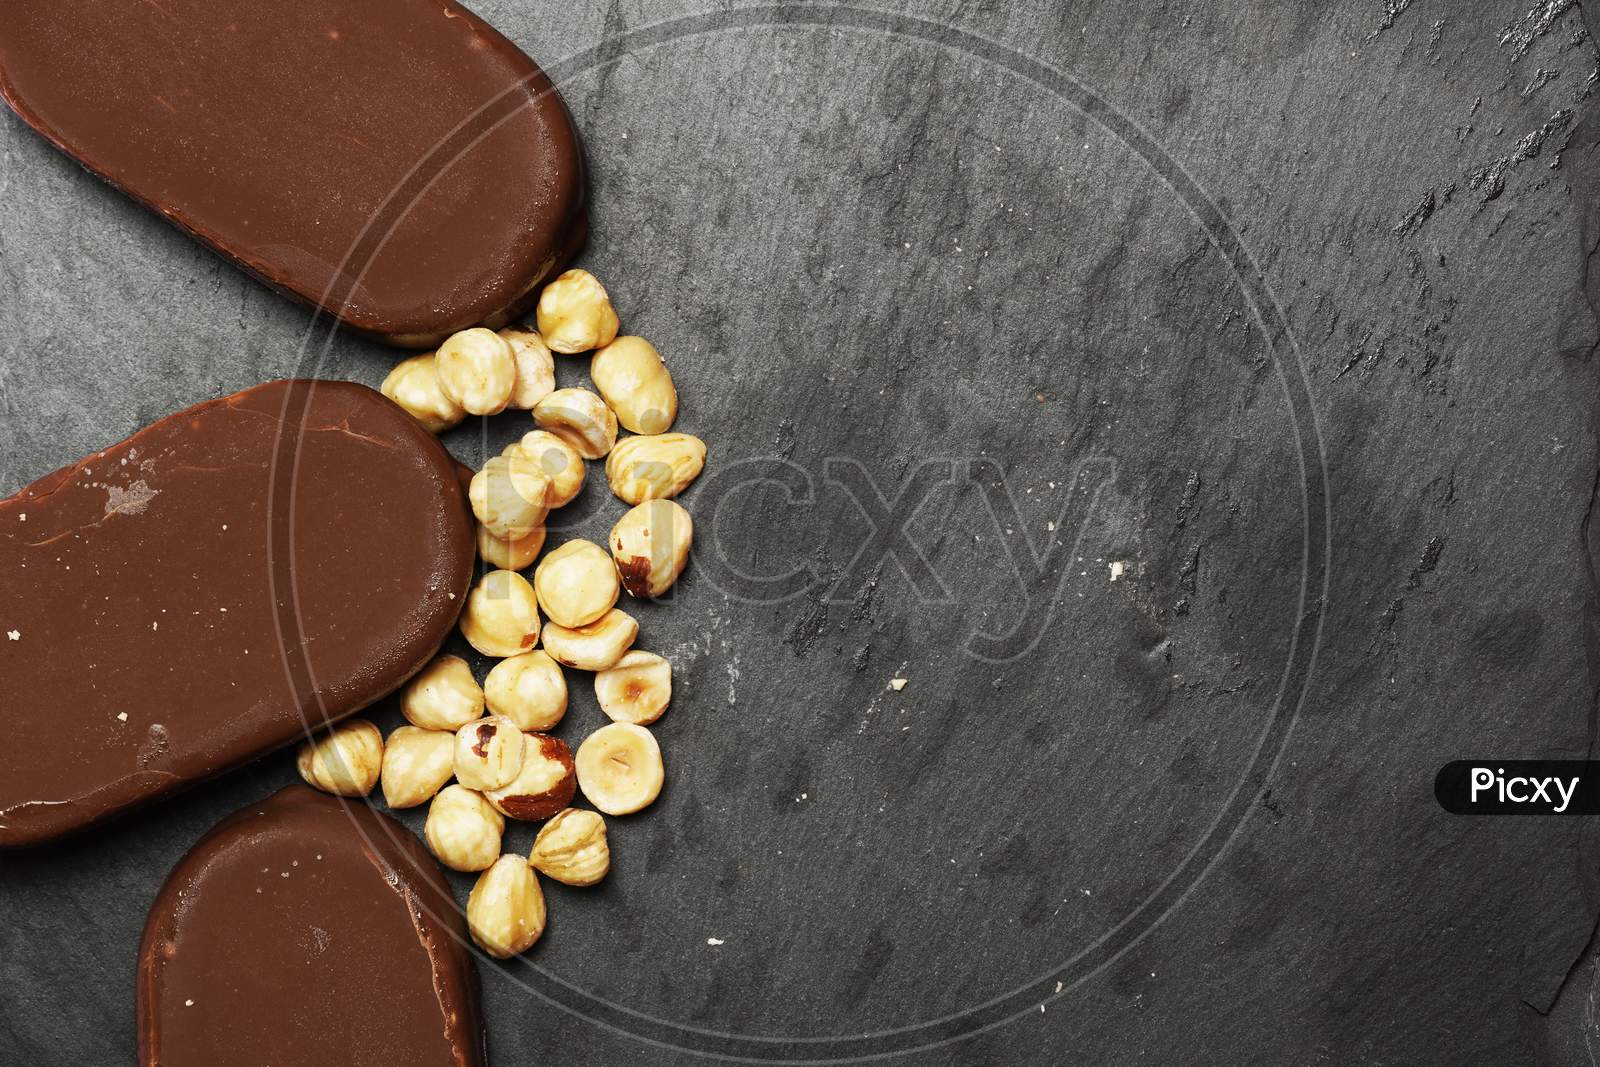 Top View Of Chocolate Ice Cream On Slate Plate With Hazelnuts. Flat Lay